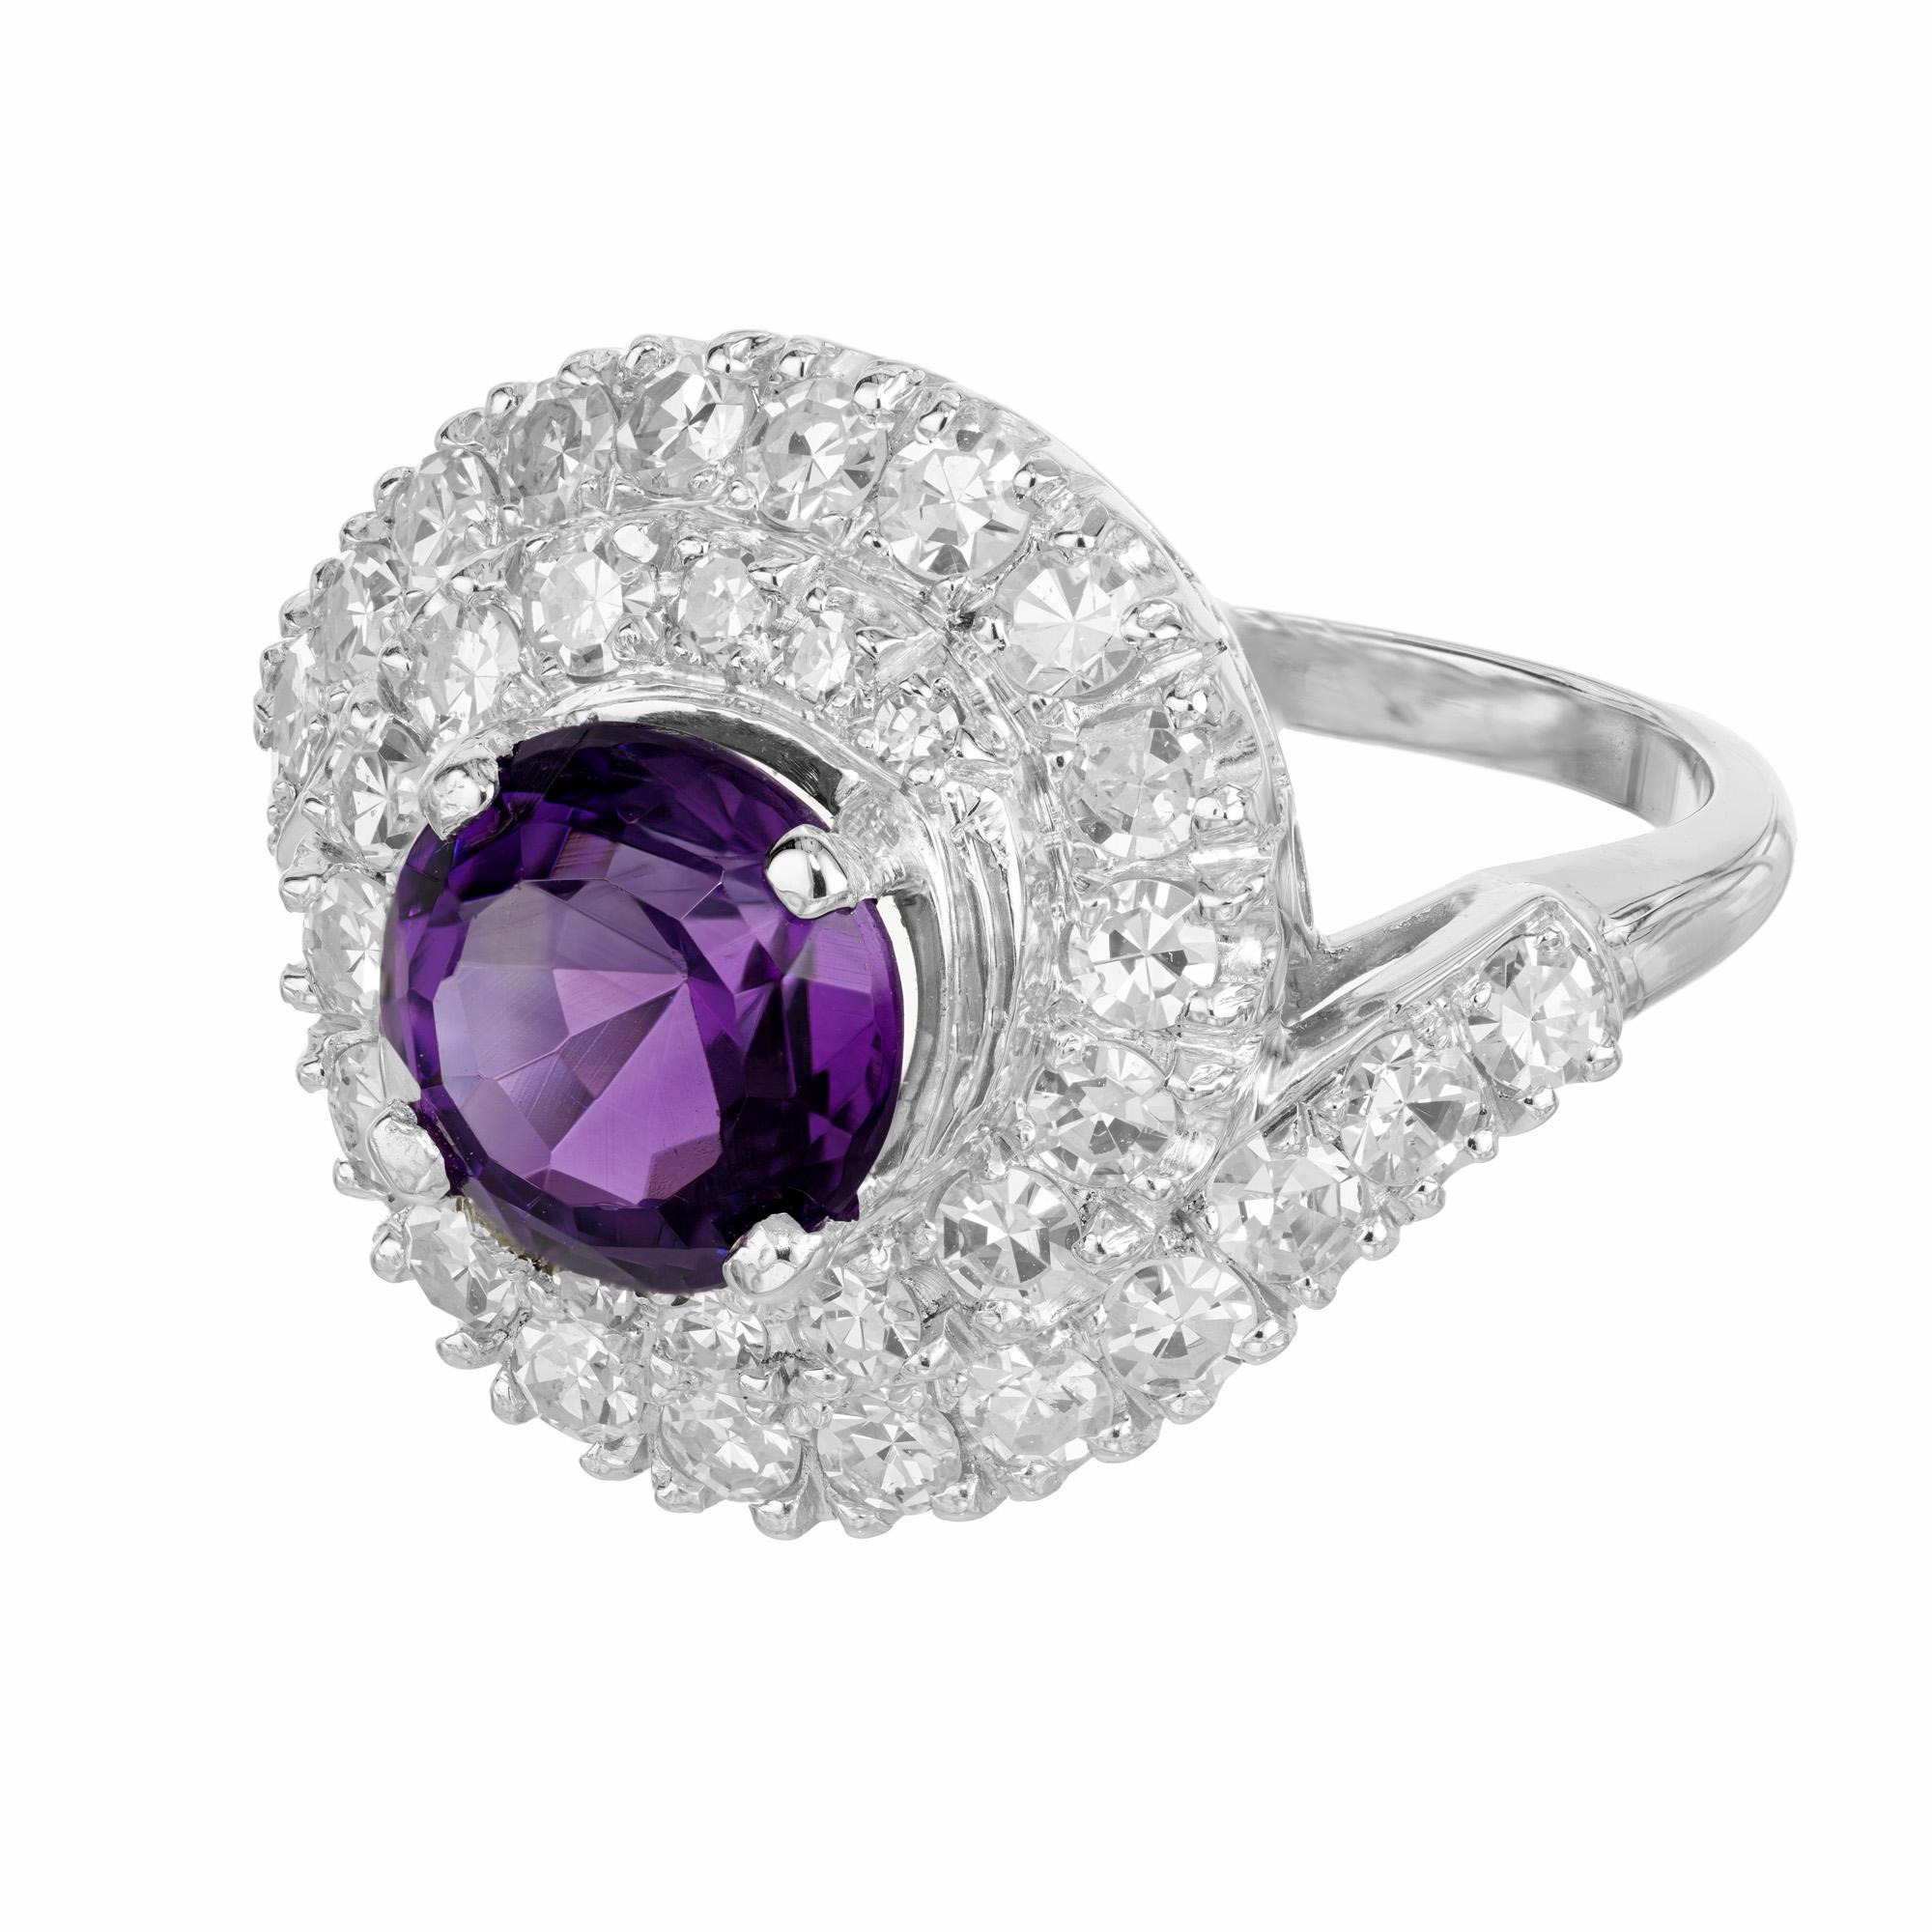 Wonderful swirl design 1950's amethyst and diamond cocktail ring. The center piece of this mid-century design is a round purple amethyst. Mounted in a platinum setting, this gemstone is haloed with two rows of single cut diamonds in a swirl design.